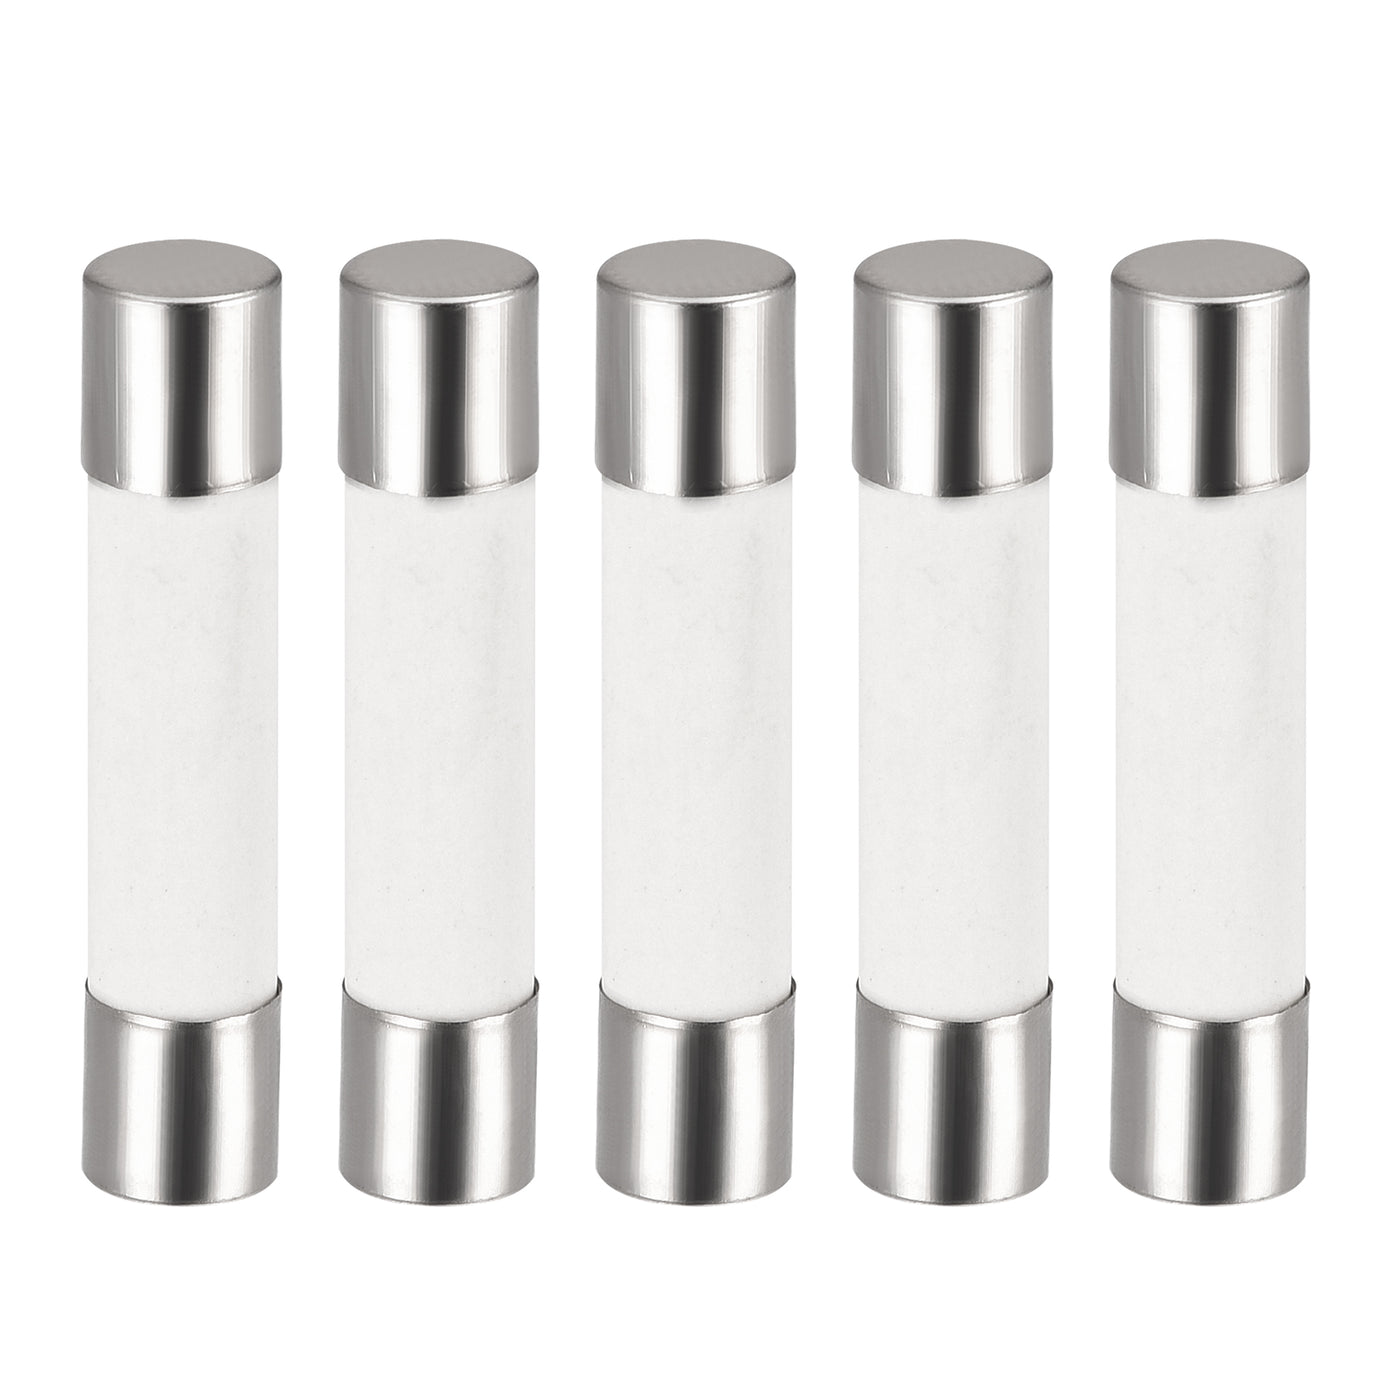 uxcell Uxcell Ceramic Cartridge Fuses 3.15A 250V 6x30mm Fast Blow for Energy Saving Lamp 5pcs